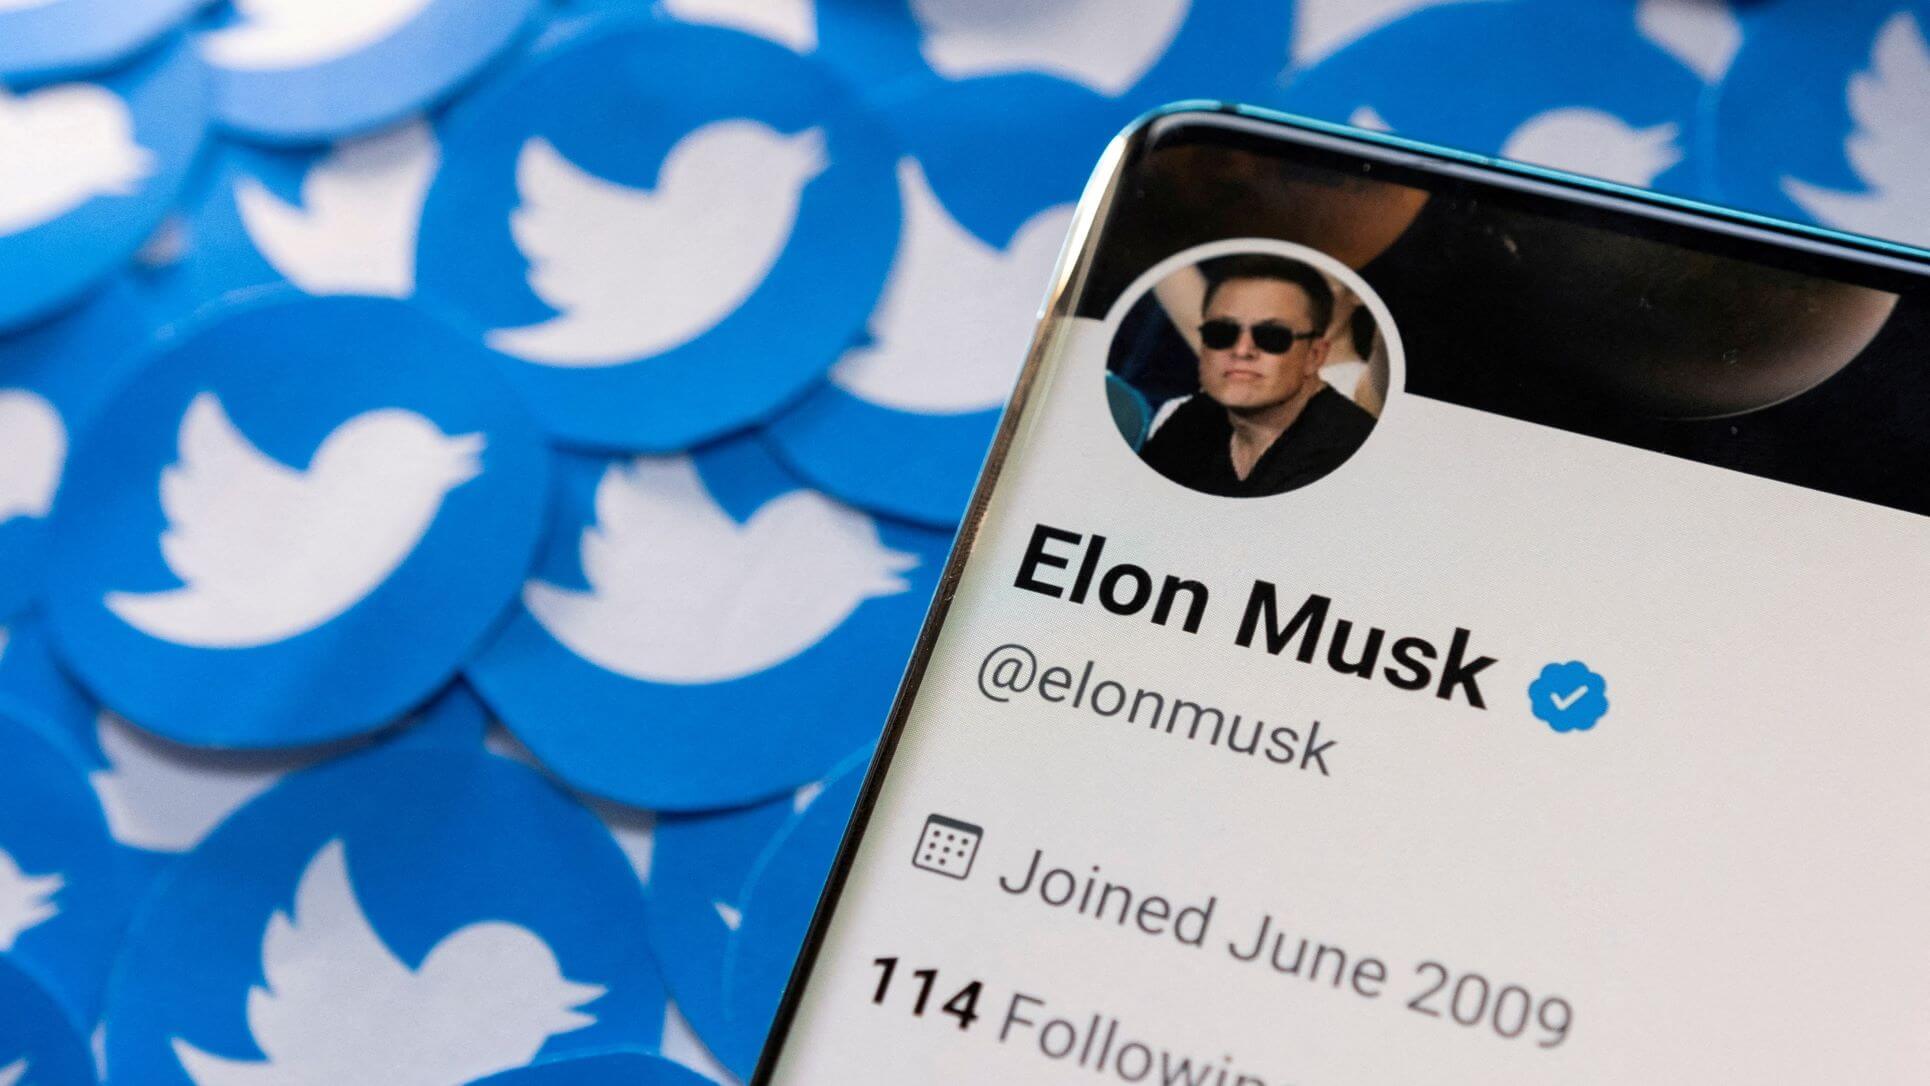 Twitter's Account Of Deal Shows Musk Signing Without Asking For More Info